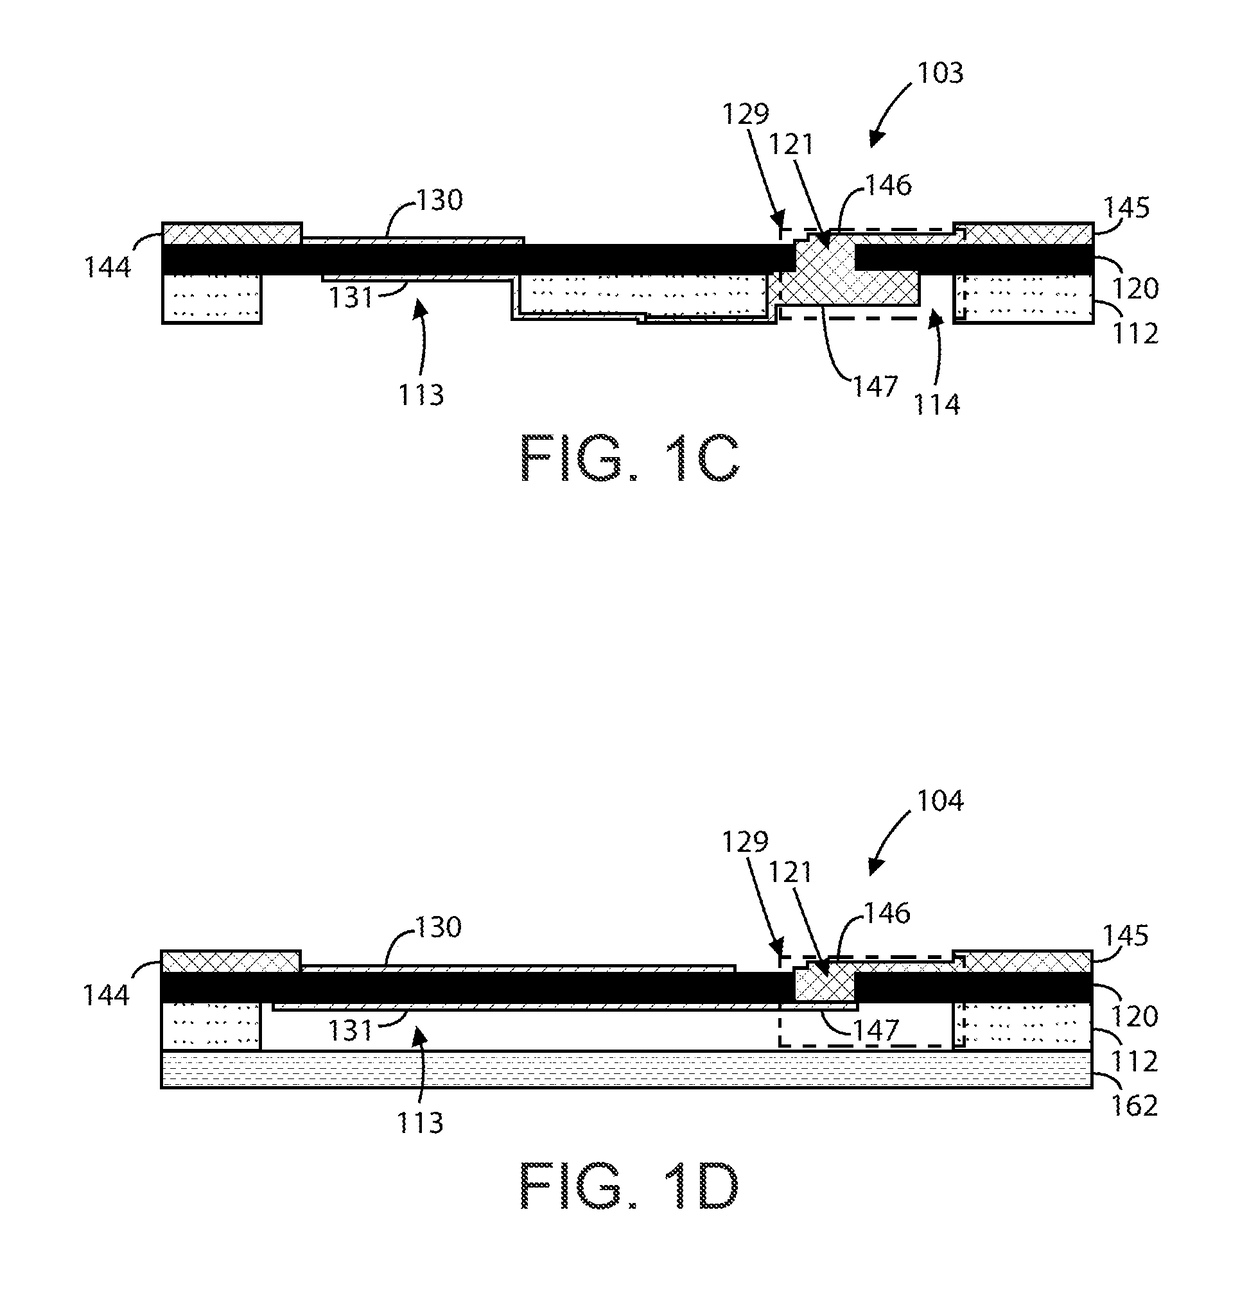 Method of manufacture for single crystal acoustic resonator devices using micro-vias